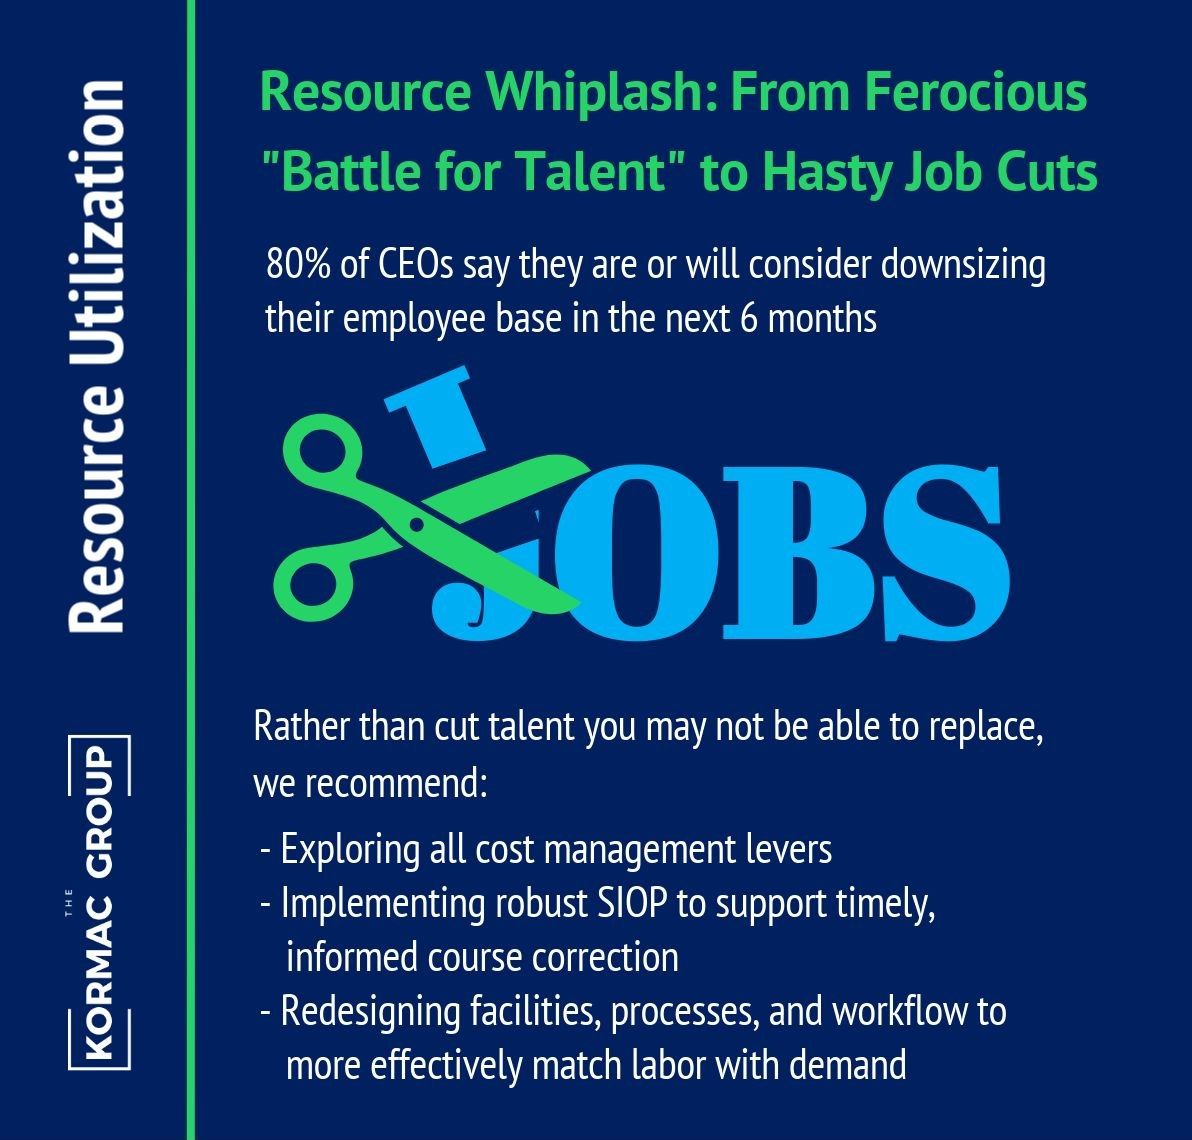 Resource Utilization Resource Whiplash: From Ferocious "Battle for Talent" to Hasty Job Cuts 80% of CEOs say they are or will consider downsizing their employee base in the next 6 months Rather than cut talent you may not be able to replace, we recommend: - Exploring all cost management levers - Implementing robust SIOP to support timely, informed course correction - Redesigning facilities, processes, and workplow to more effectively match labor with demand